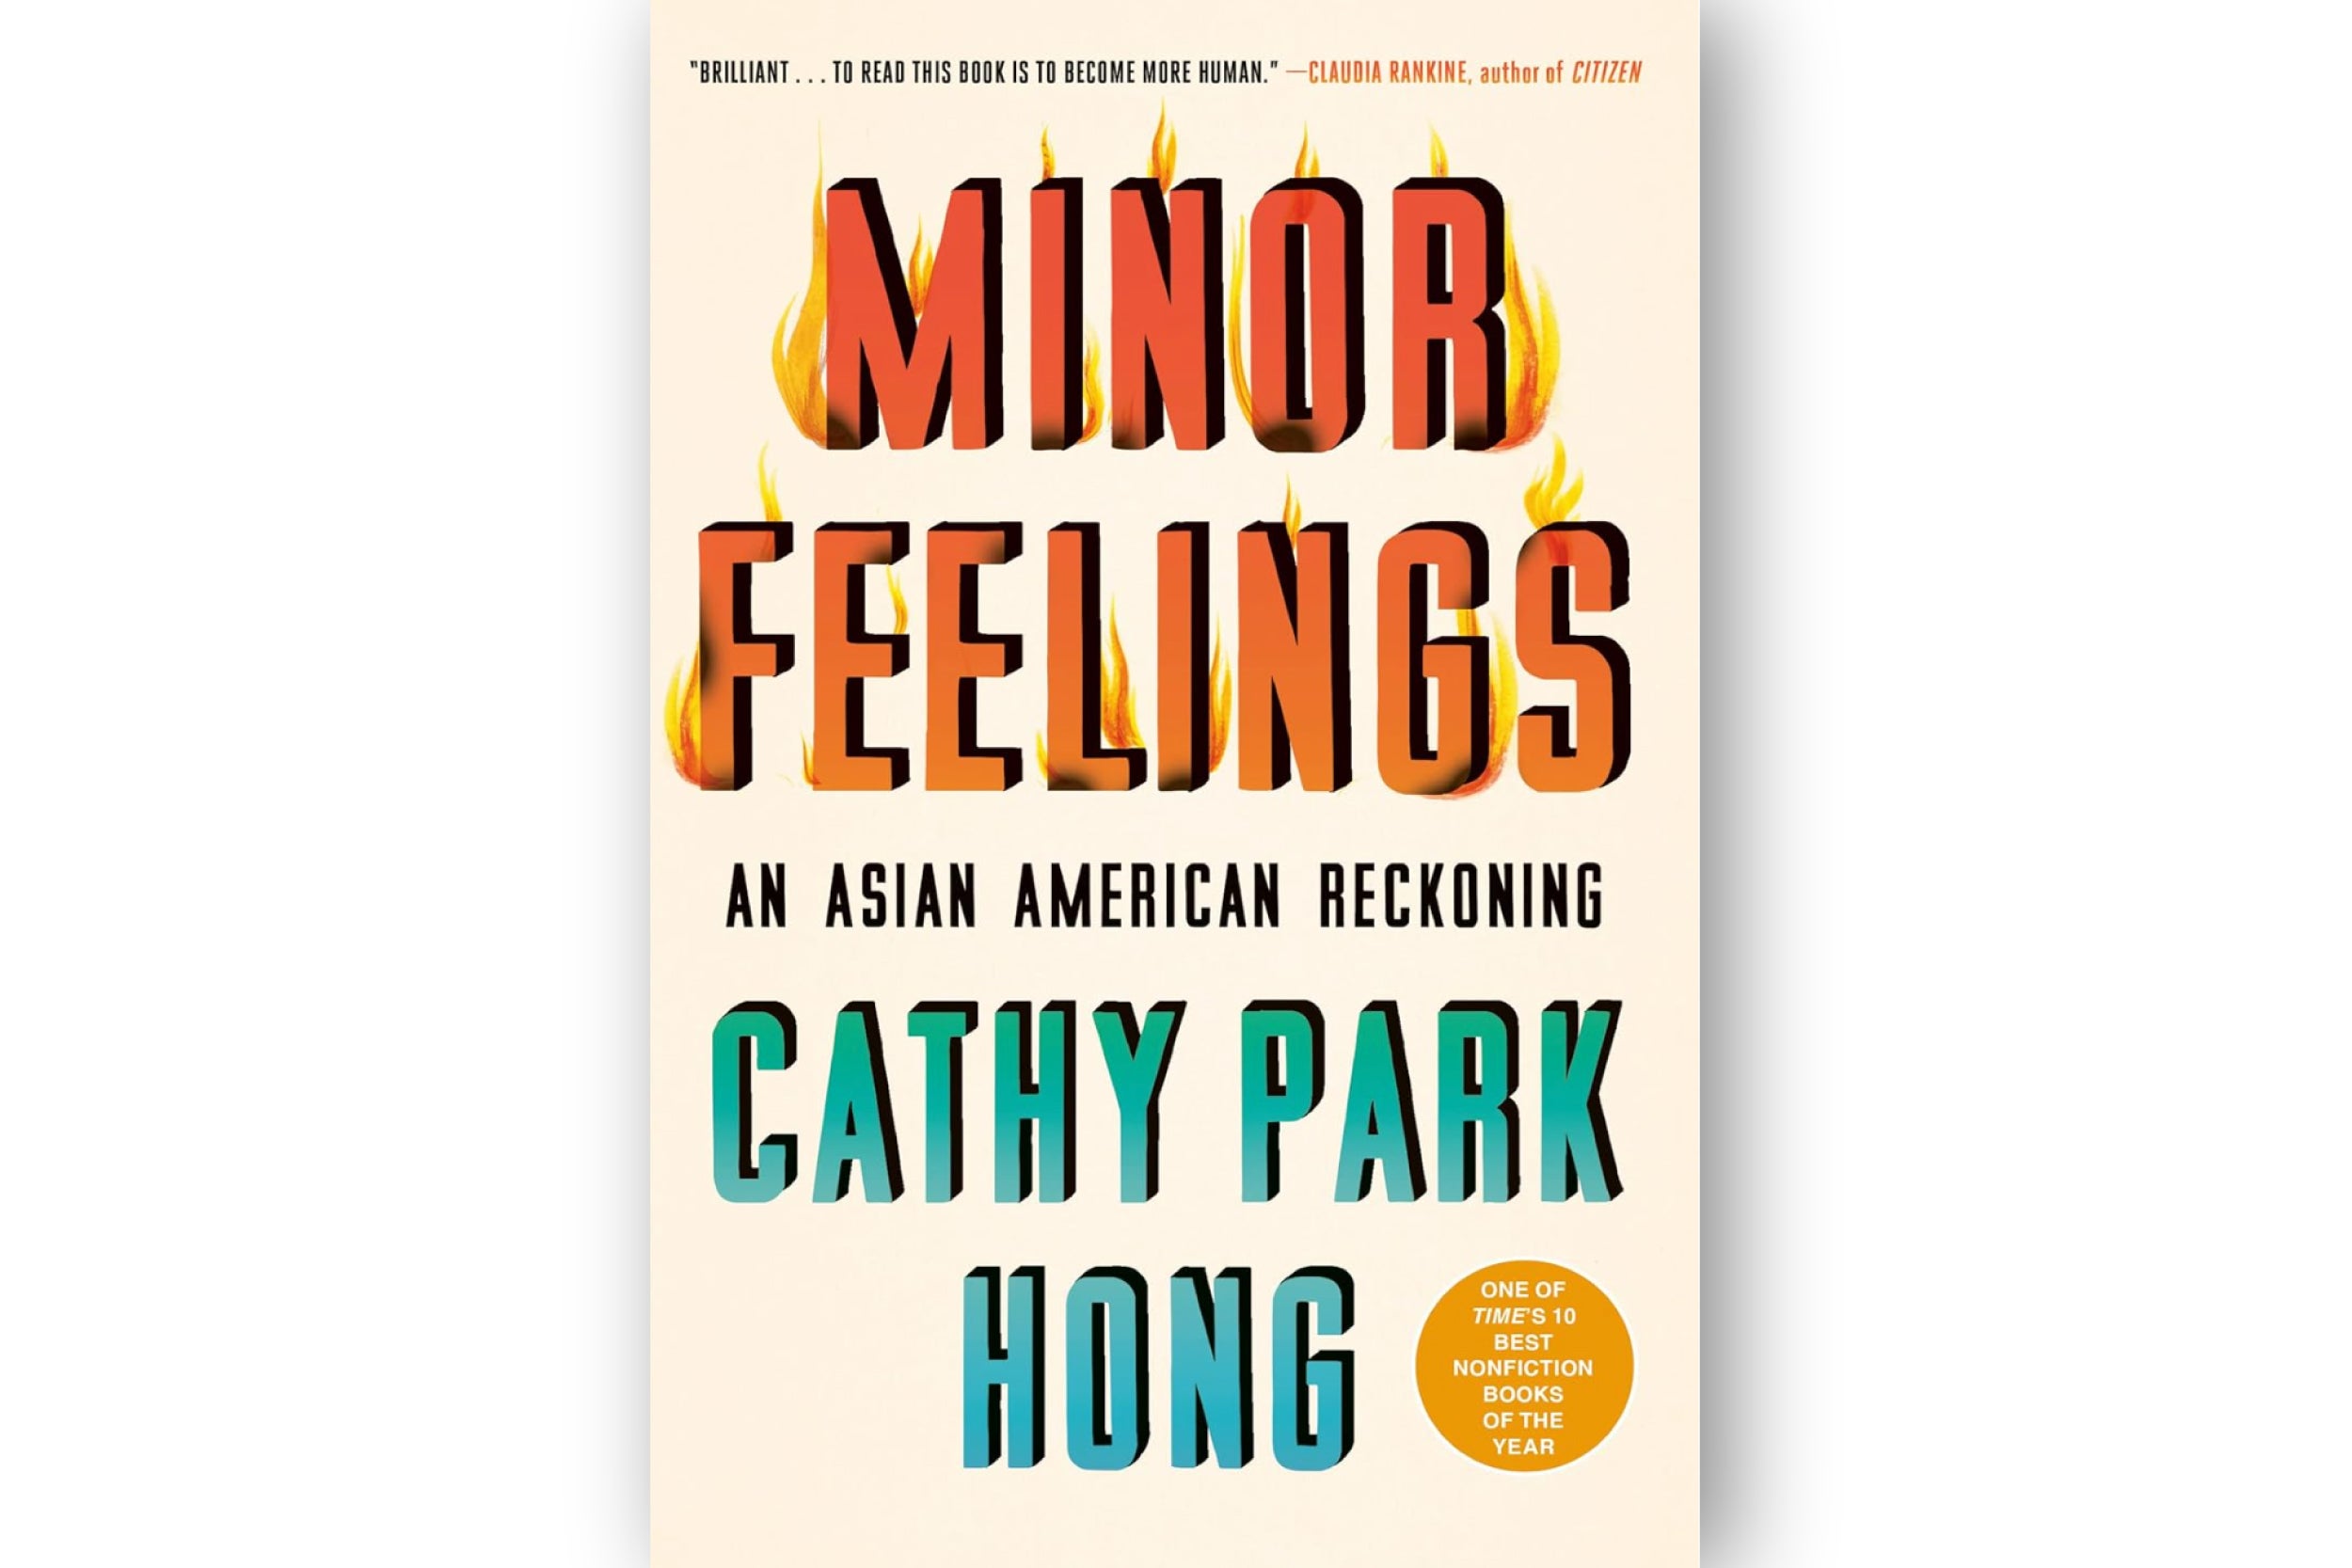 Book cover: "Minor Feelings" by Cathy Park Hong.